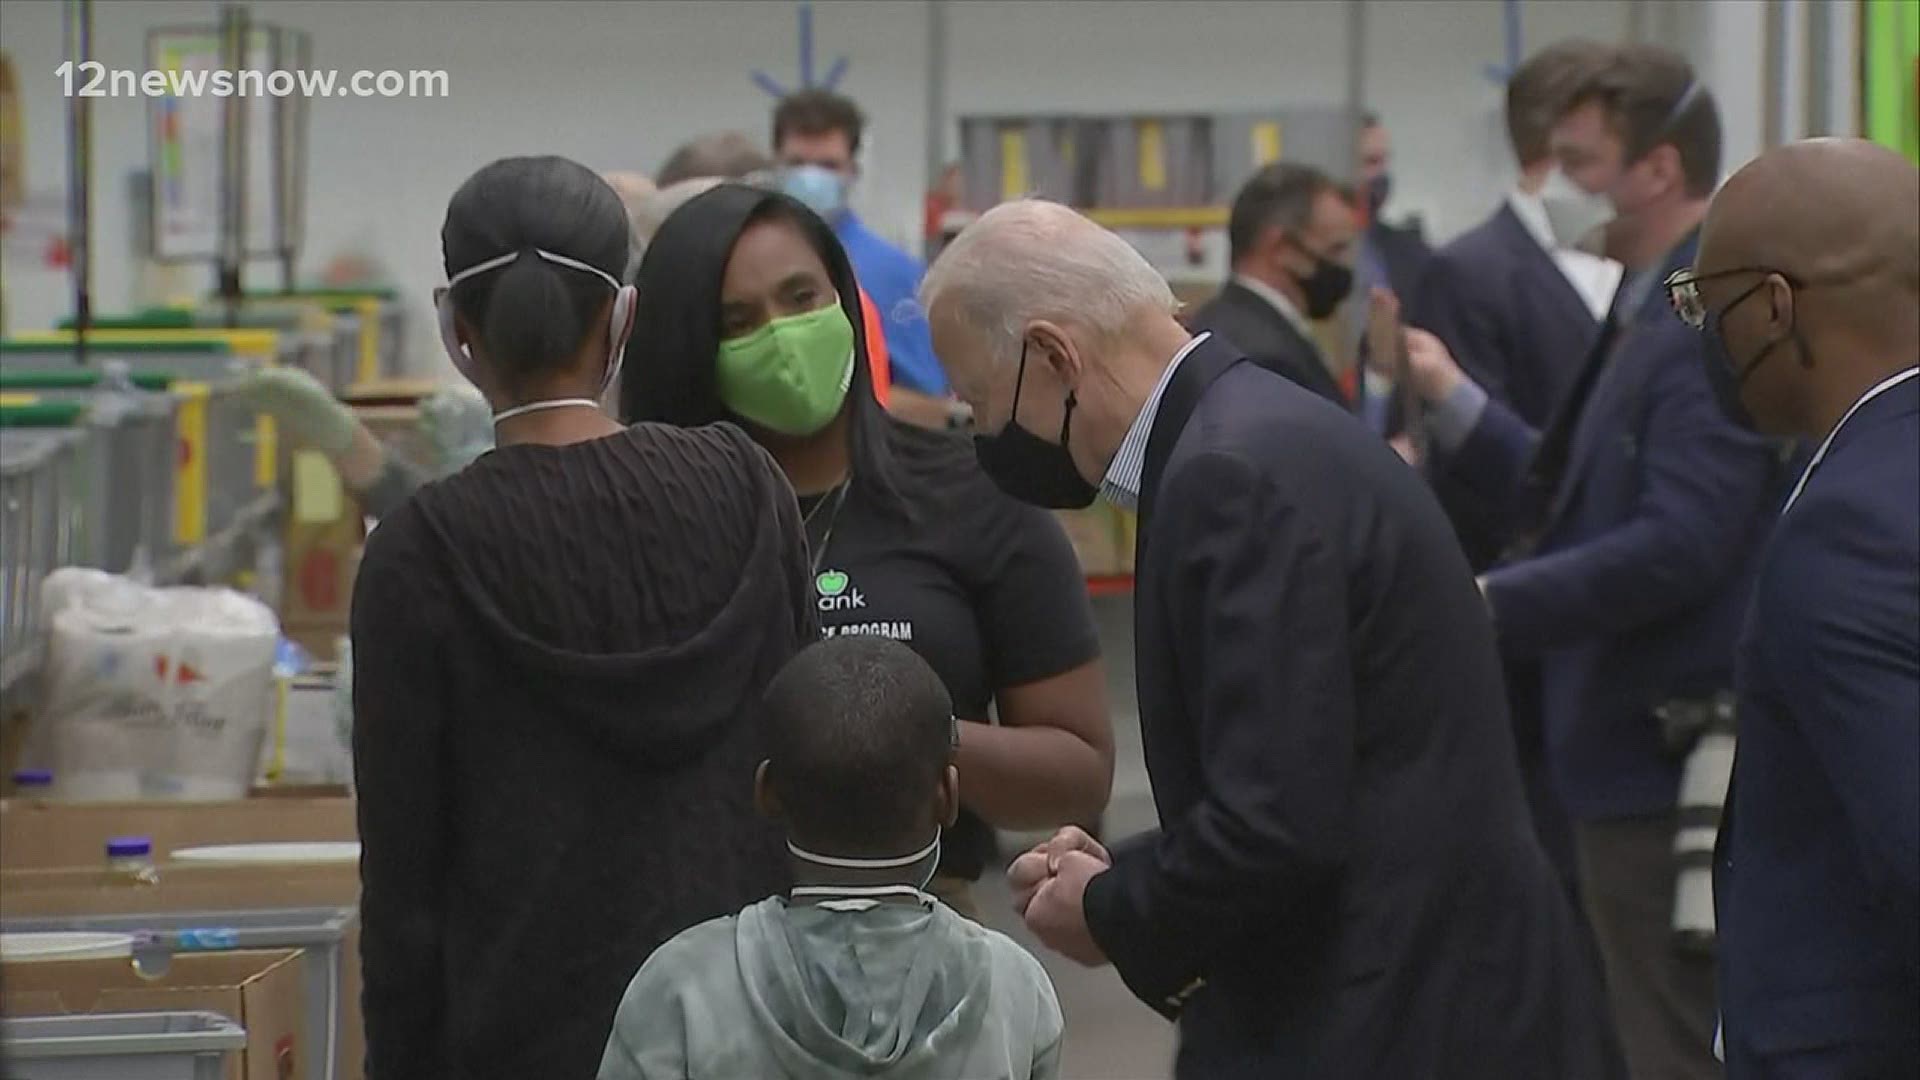 From the brains of the operation to the heart, the president and first lady saw the lifesaving work being done by the Houston Food Bank.